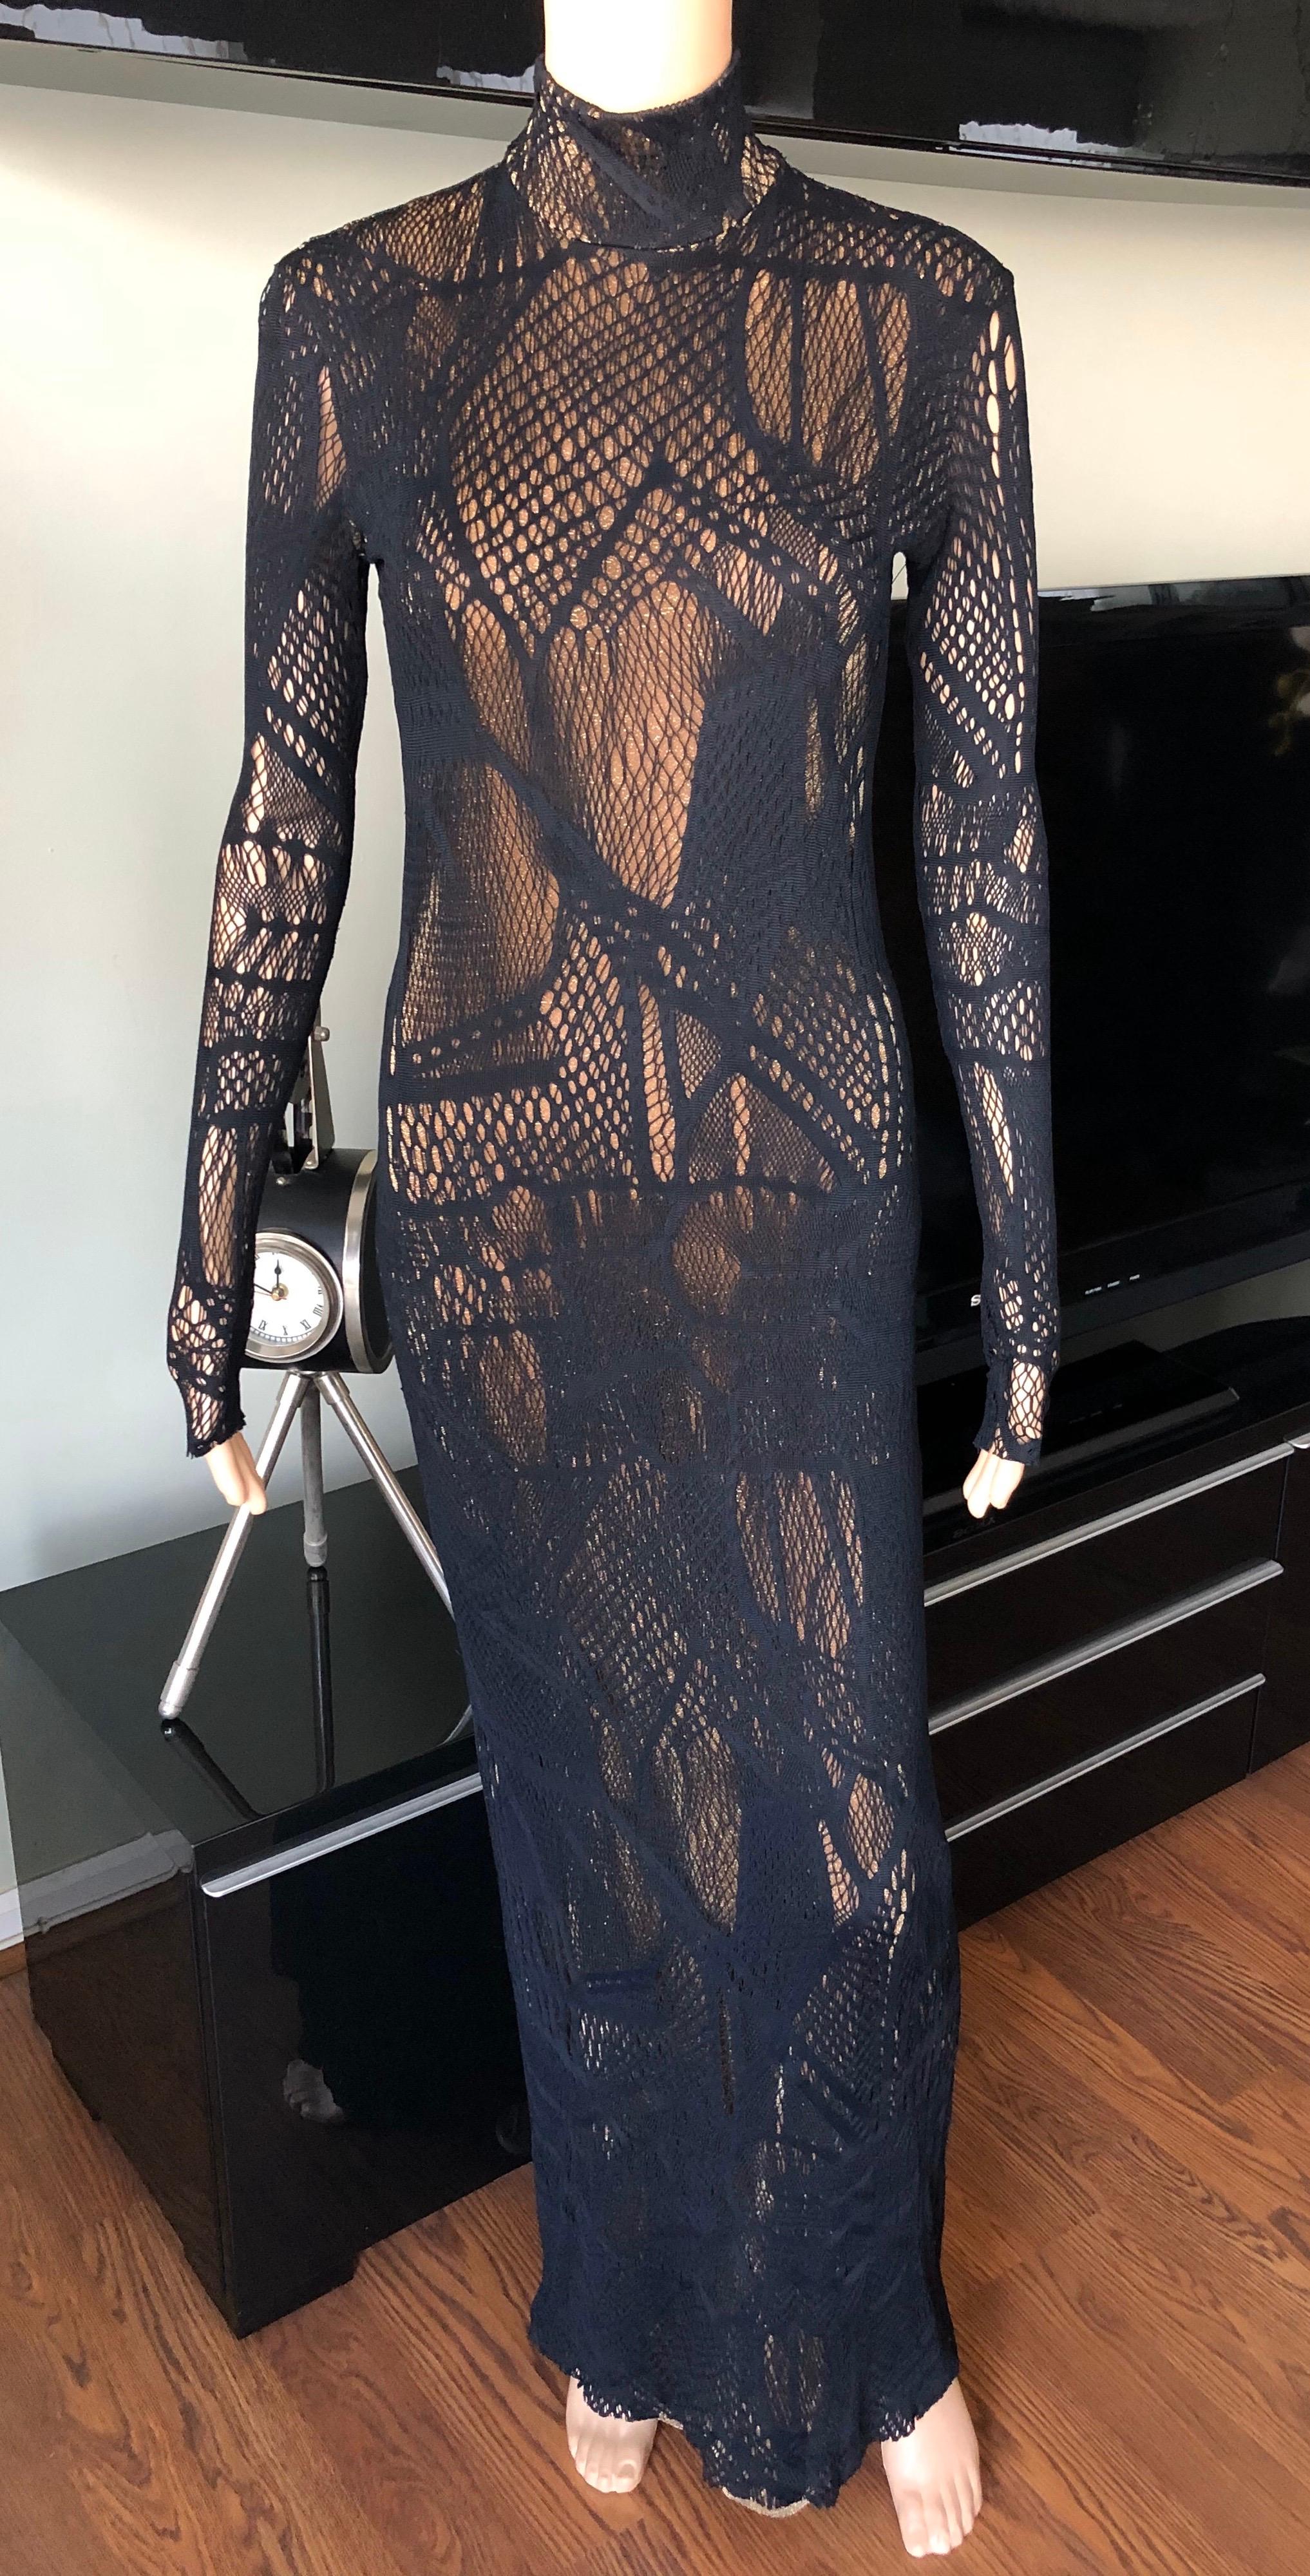 Christian Lacroix Vintage Semi-Sheer Mesh Open Knit Fishnet Black Maxi Dress FR 40

Christian Lacroix maxi dress featuring black fishnet pattern throughout, gold knit slip, mock neck, long sleeves and three button closures at back.
